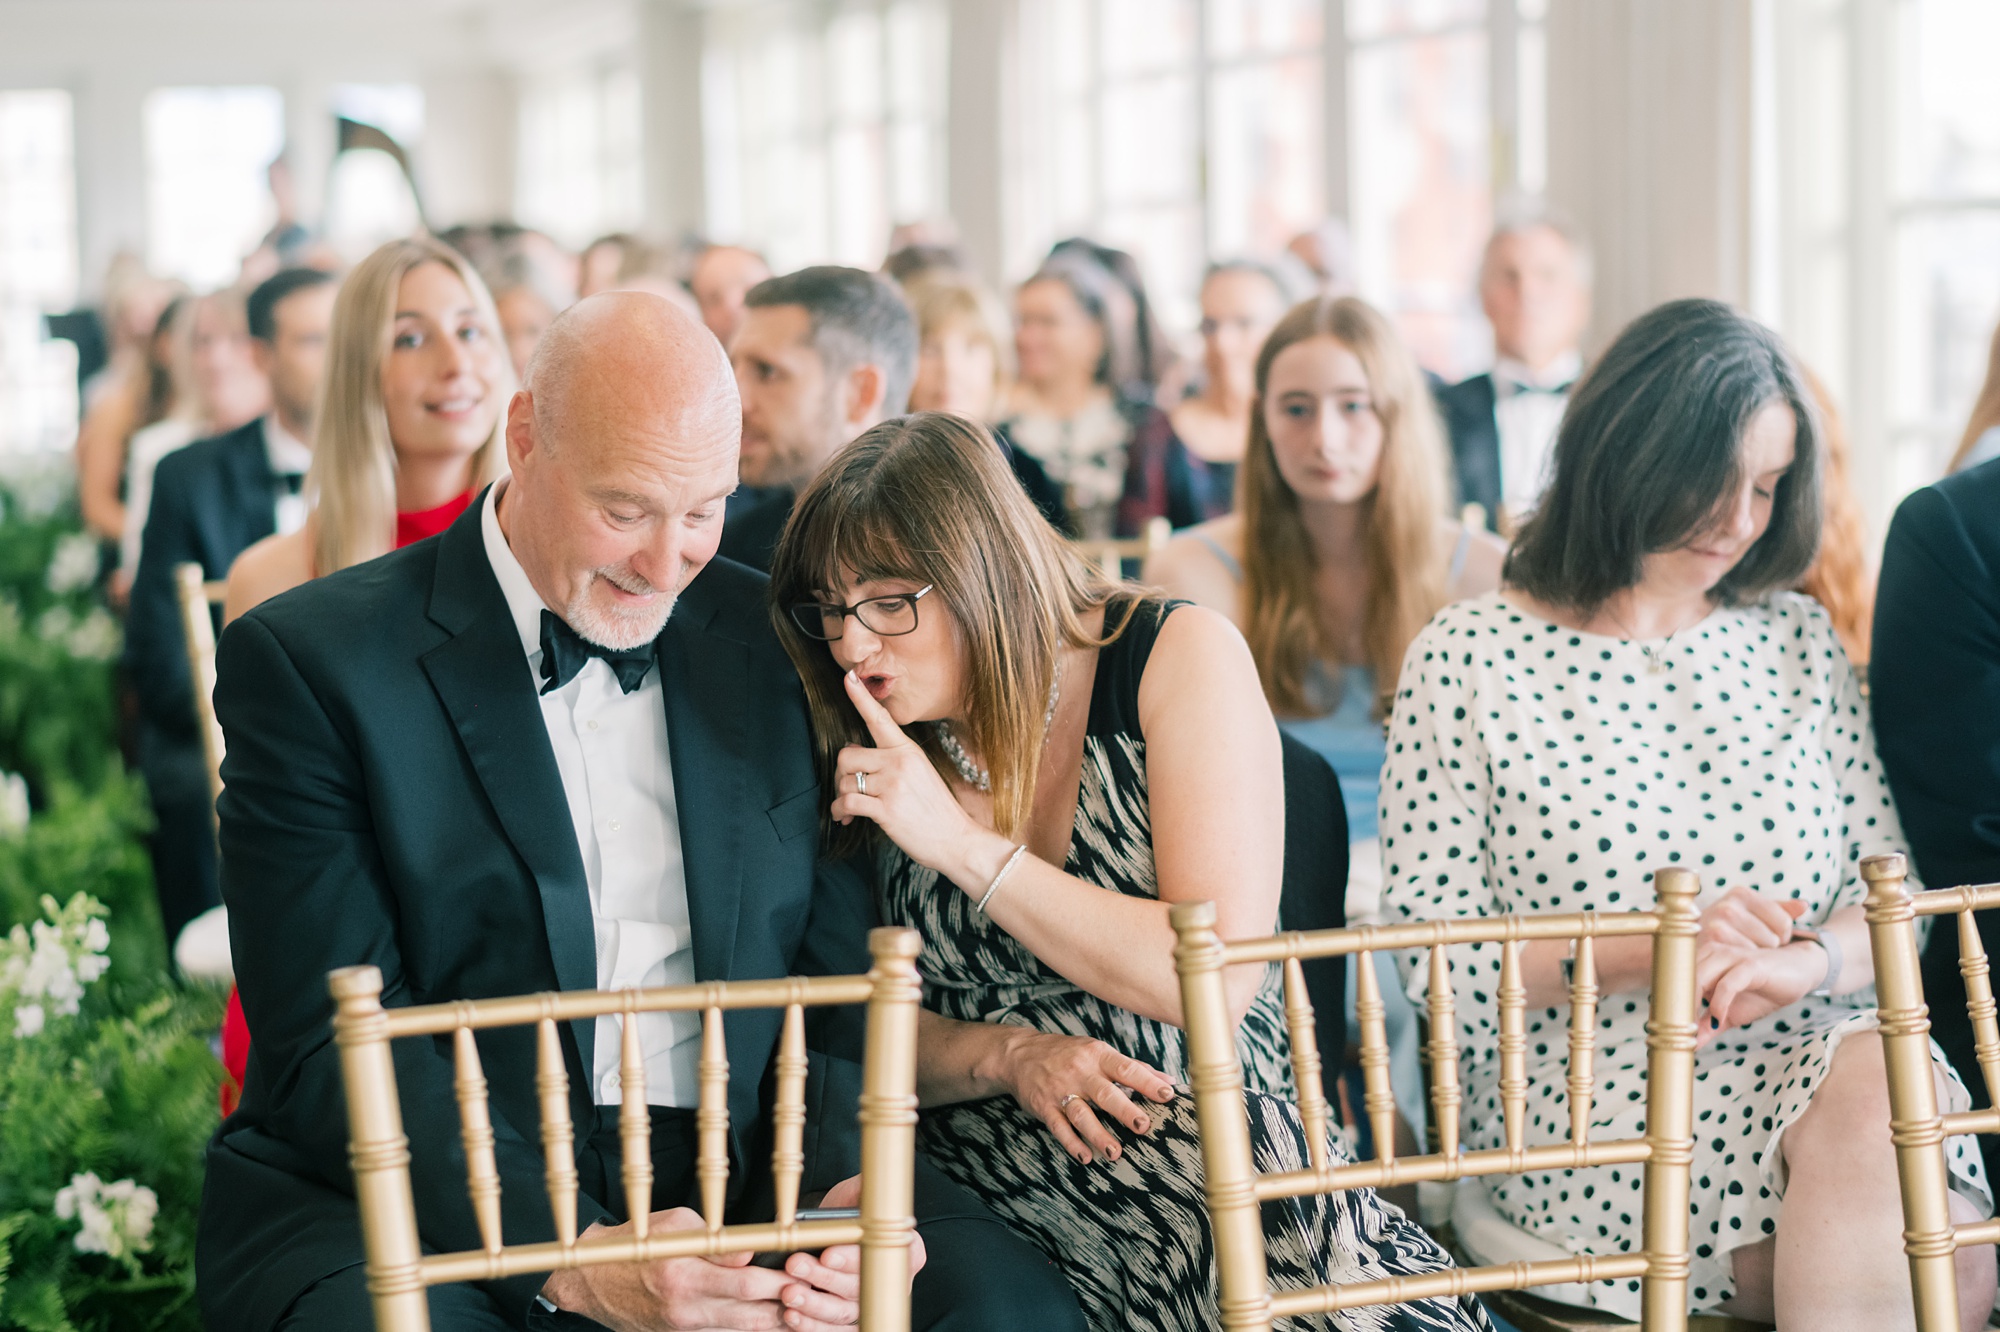 guests wait for wedding ceremony inside the Hay Adams Hotel